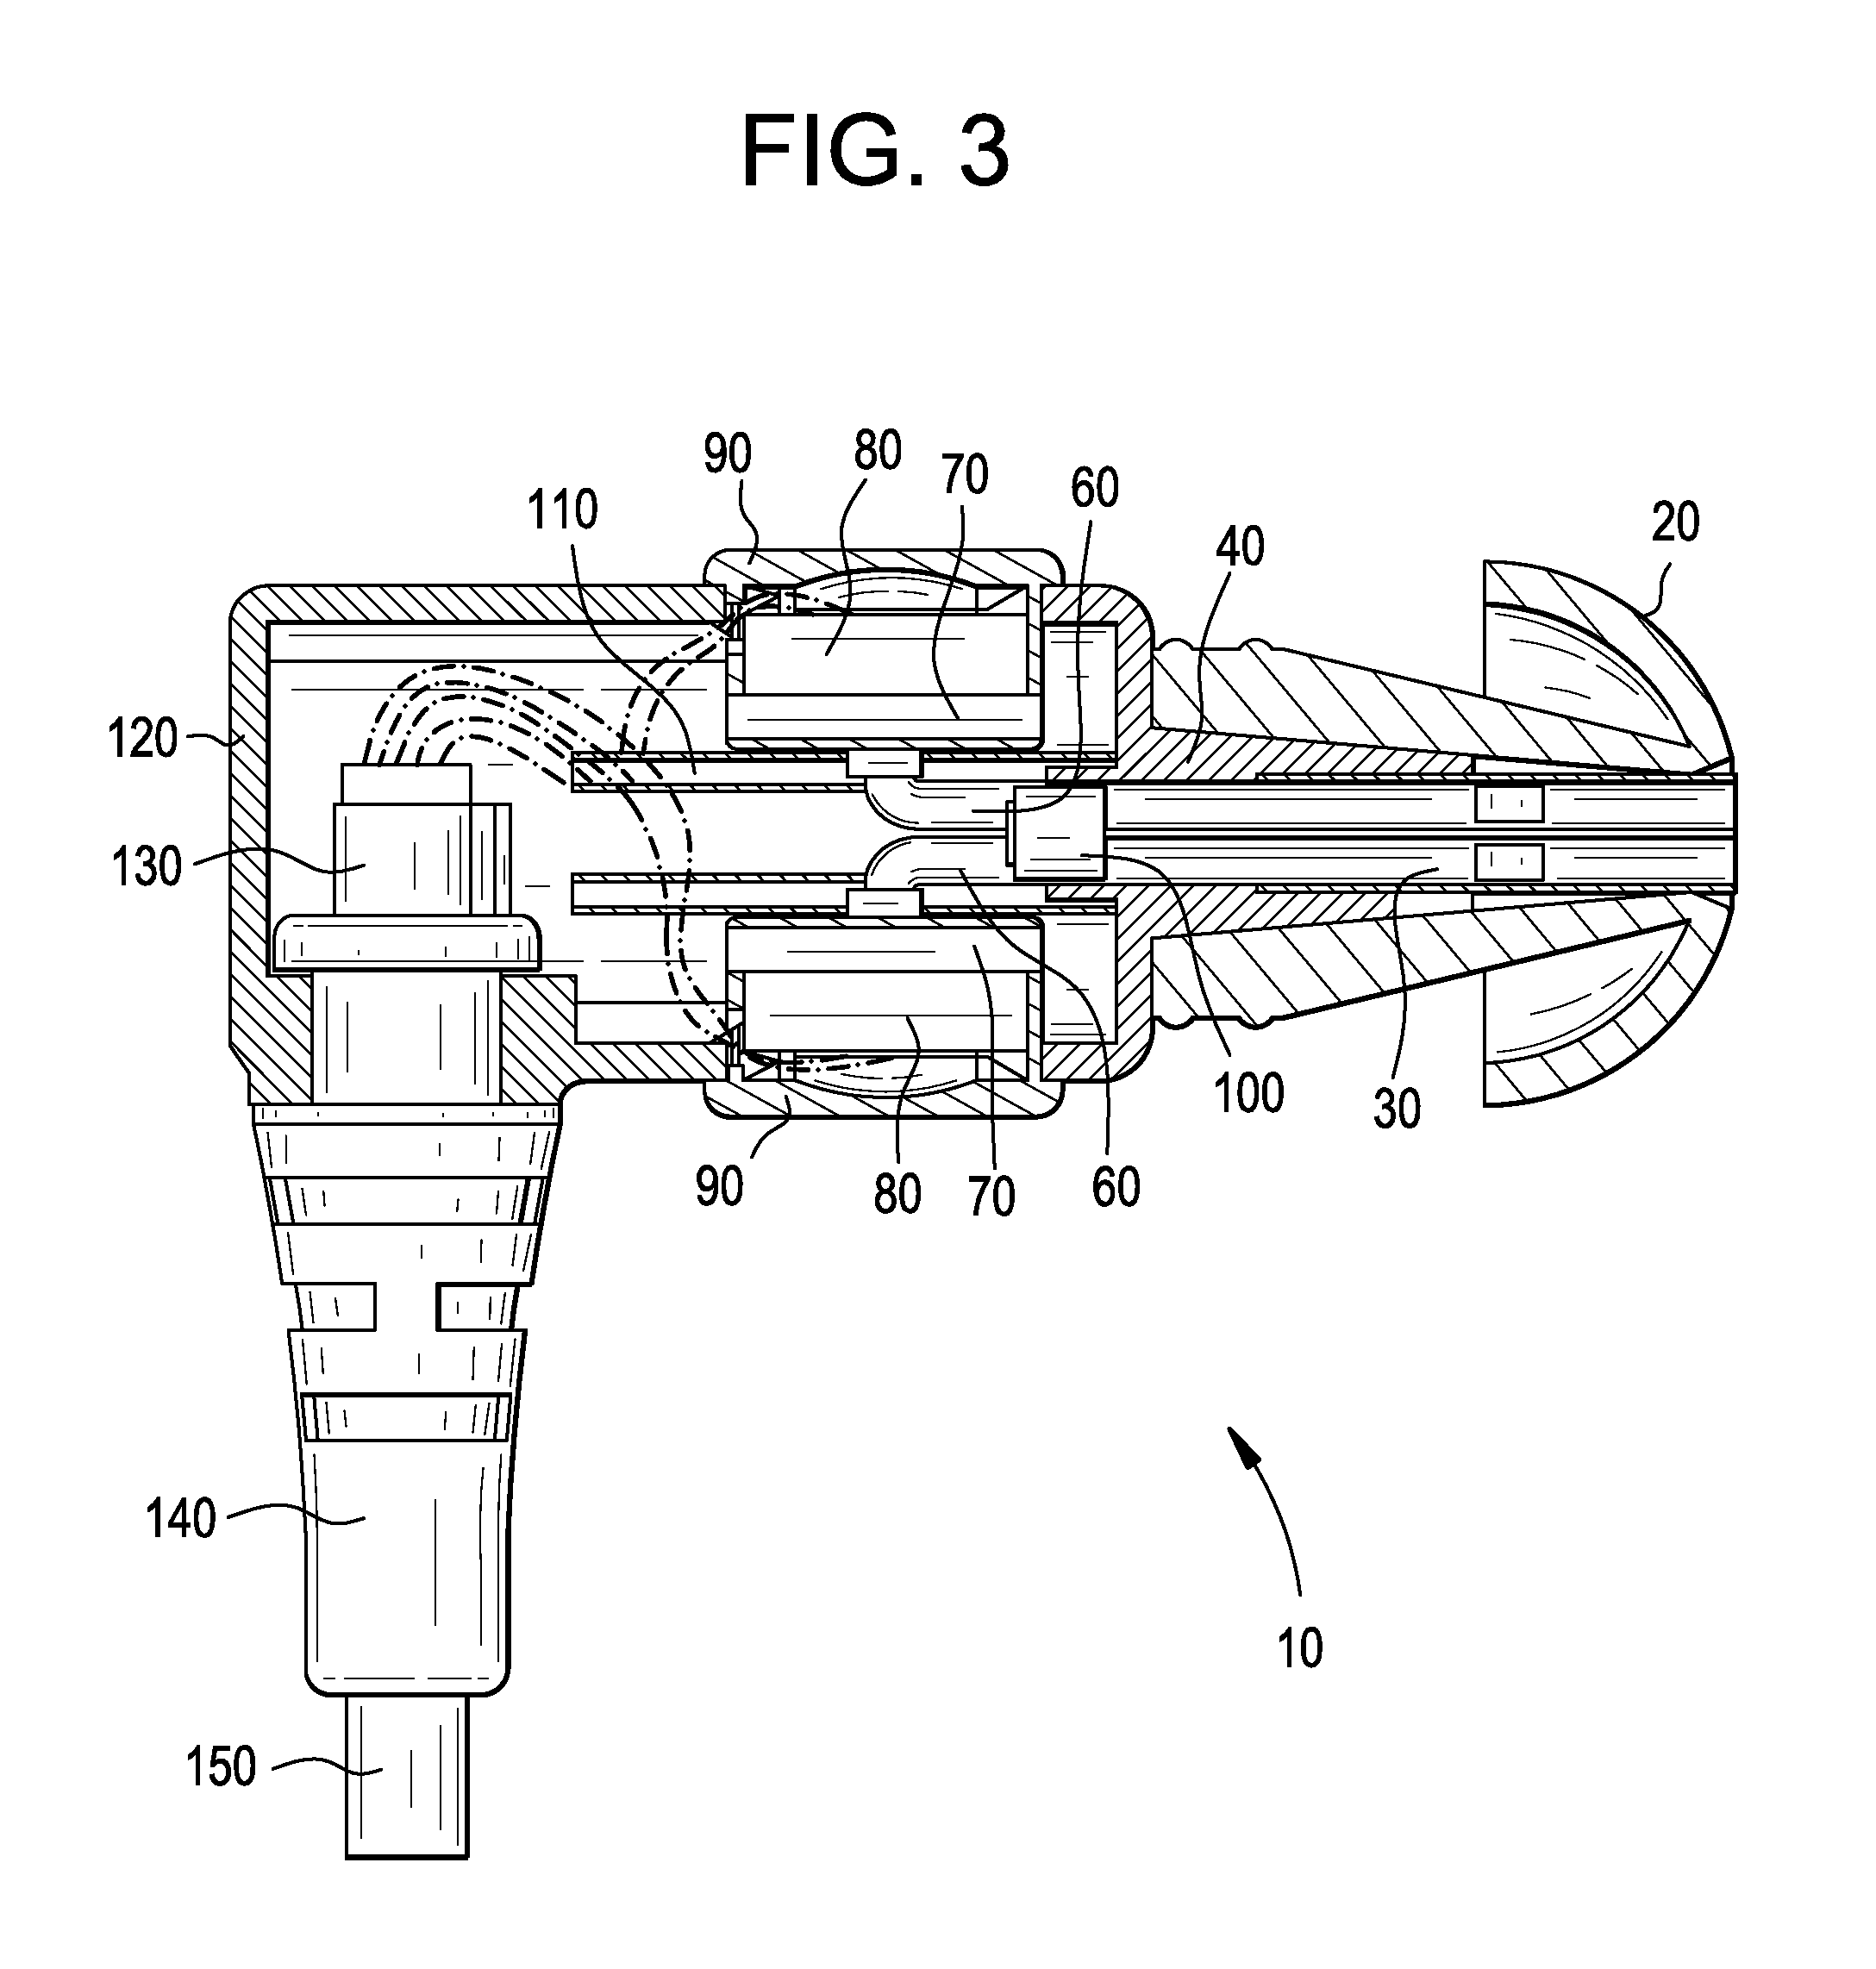 Hearing testing probe apparatus with digital interface